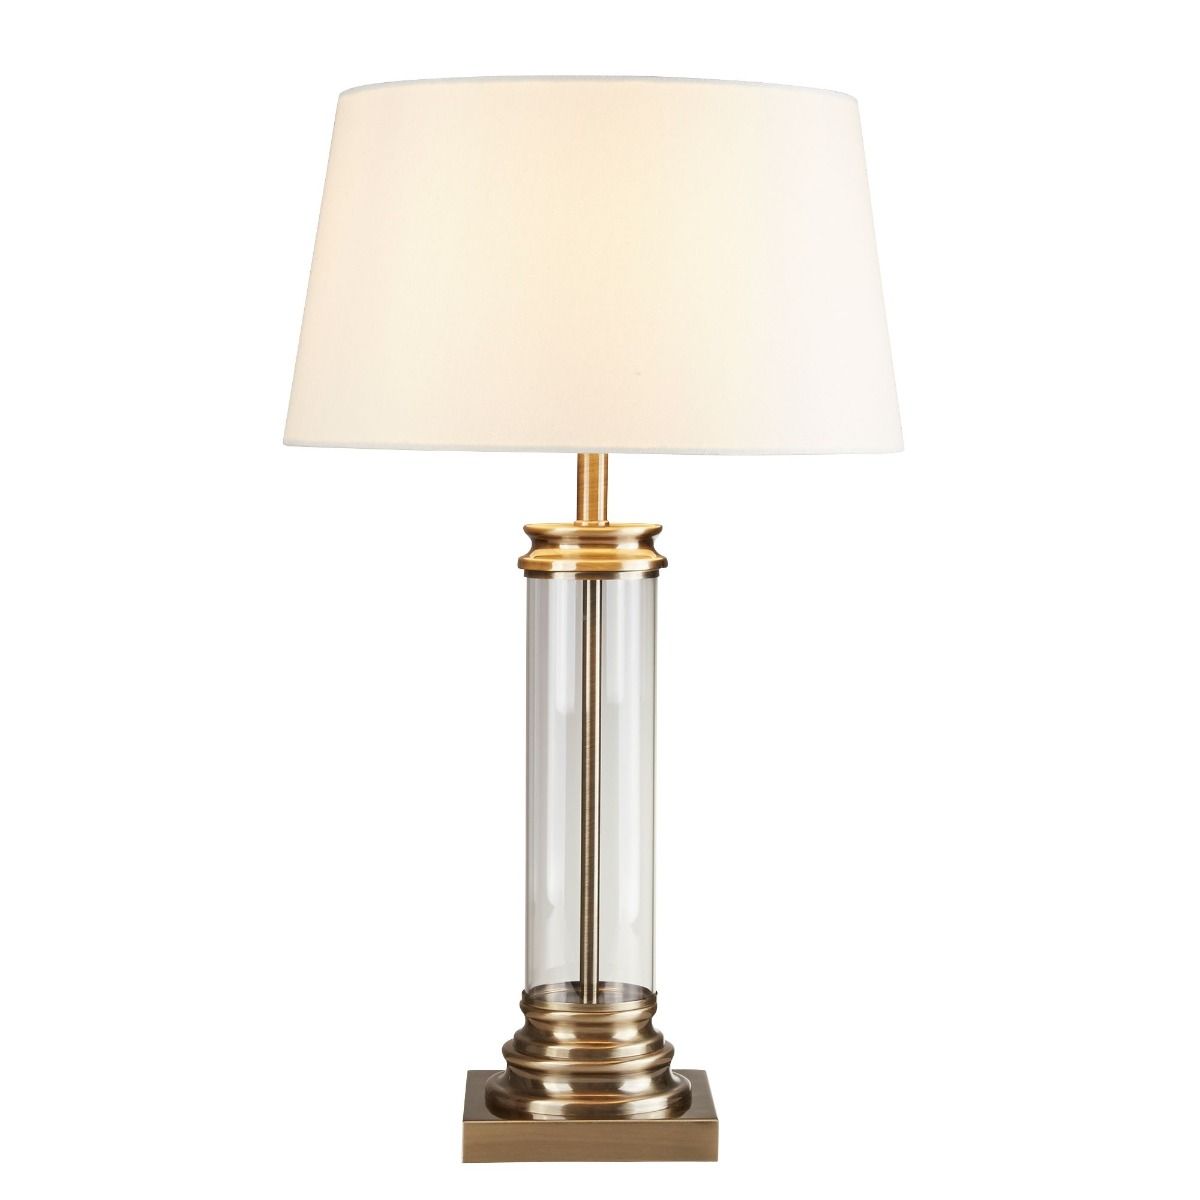 Pedestal Antique Brass 62cm Table Lamp with Glass Column and Cream Shade